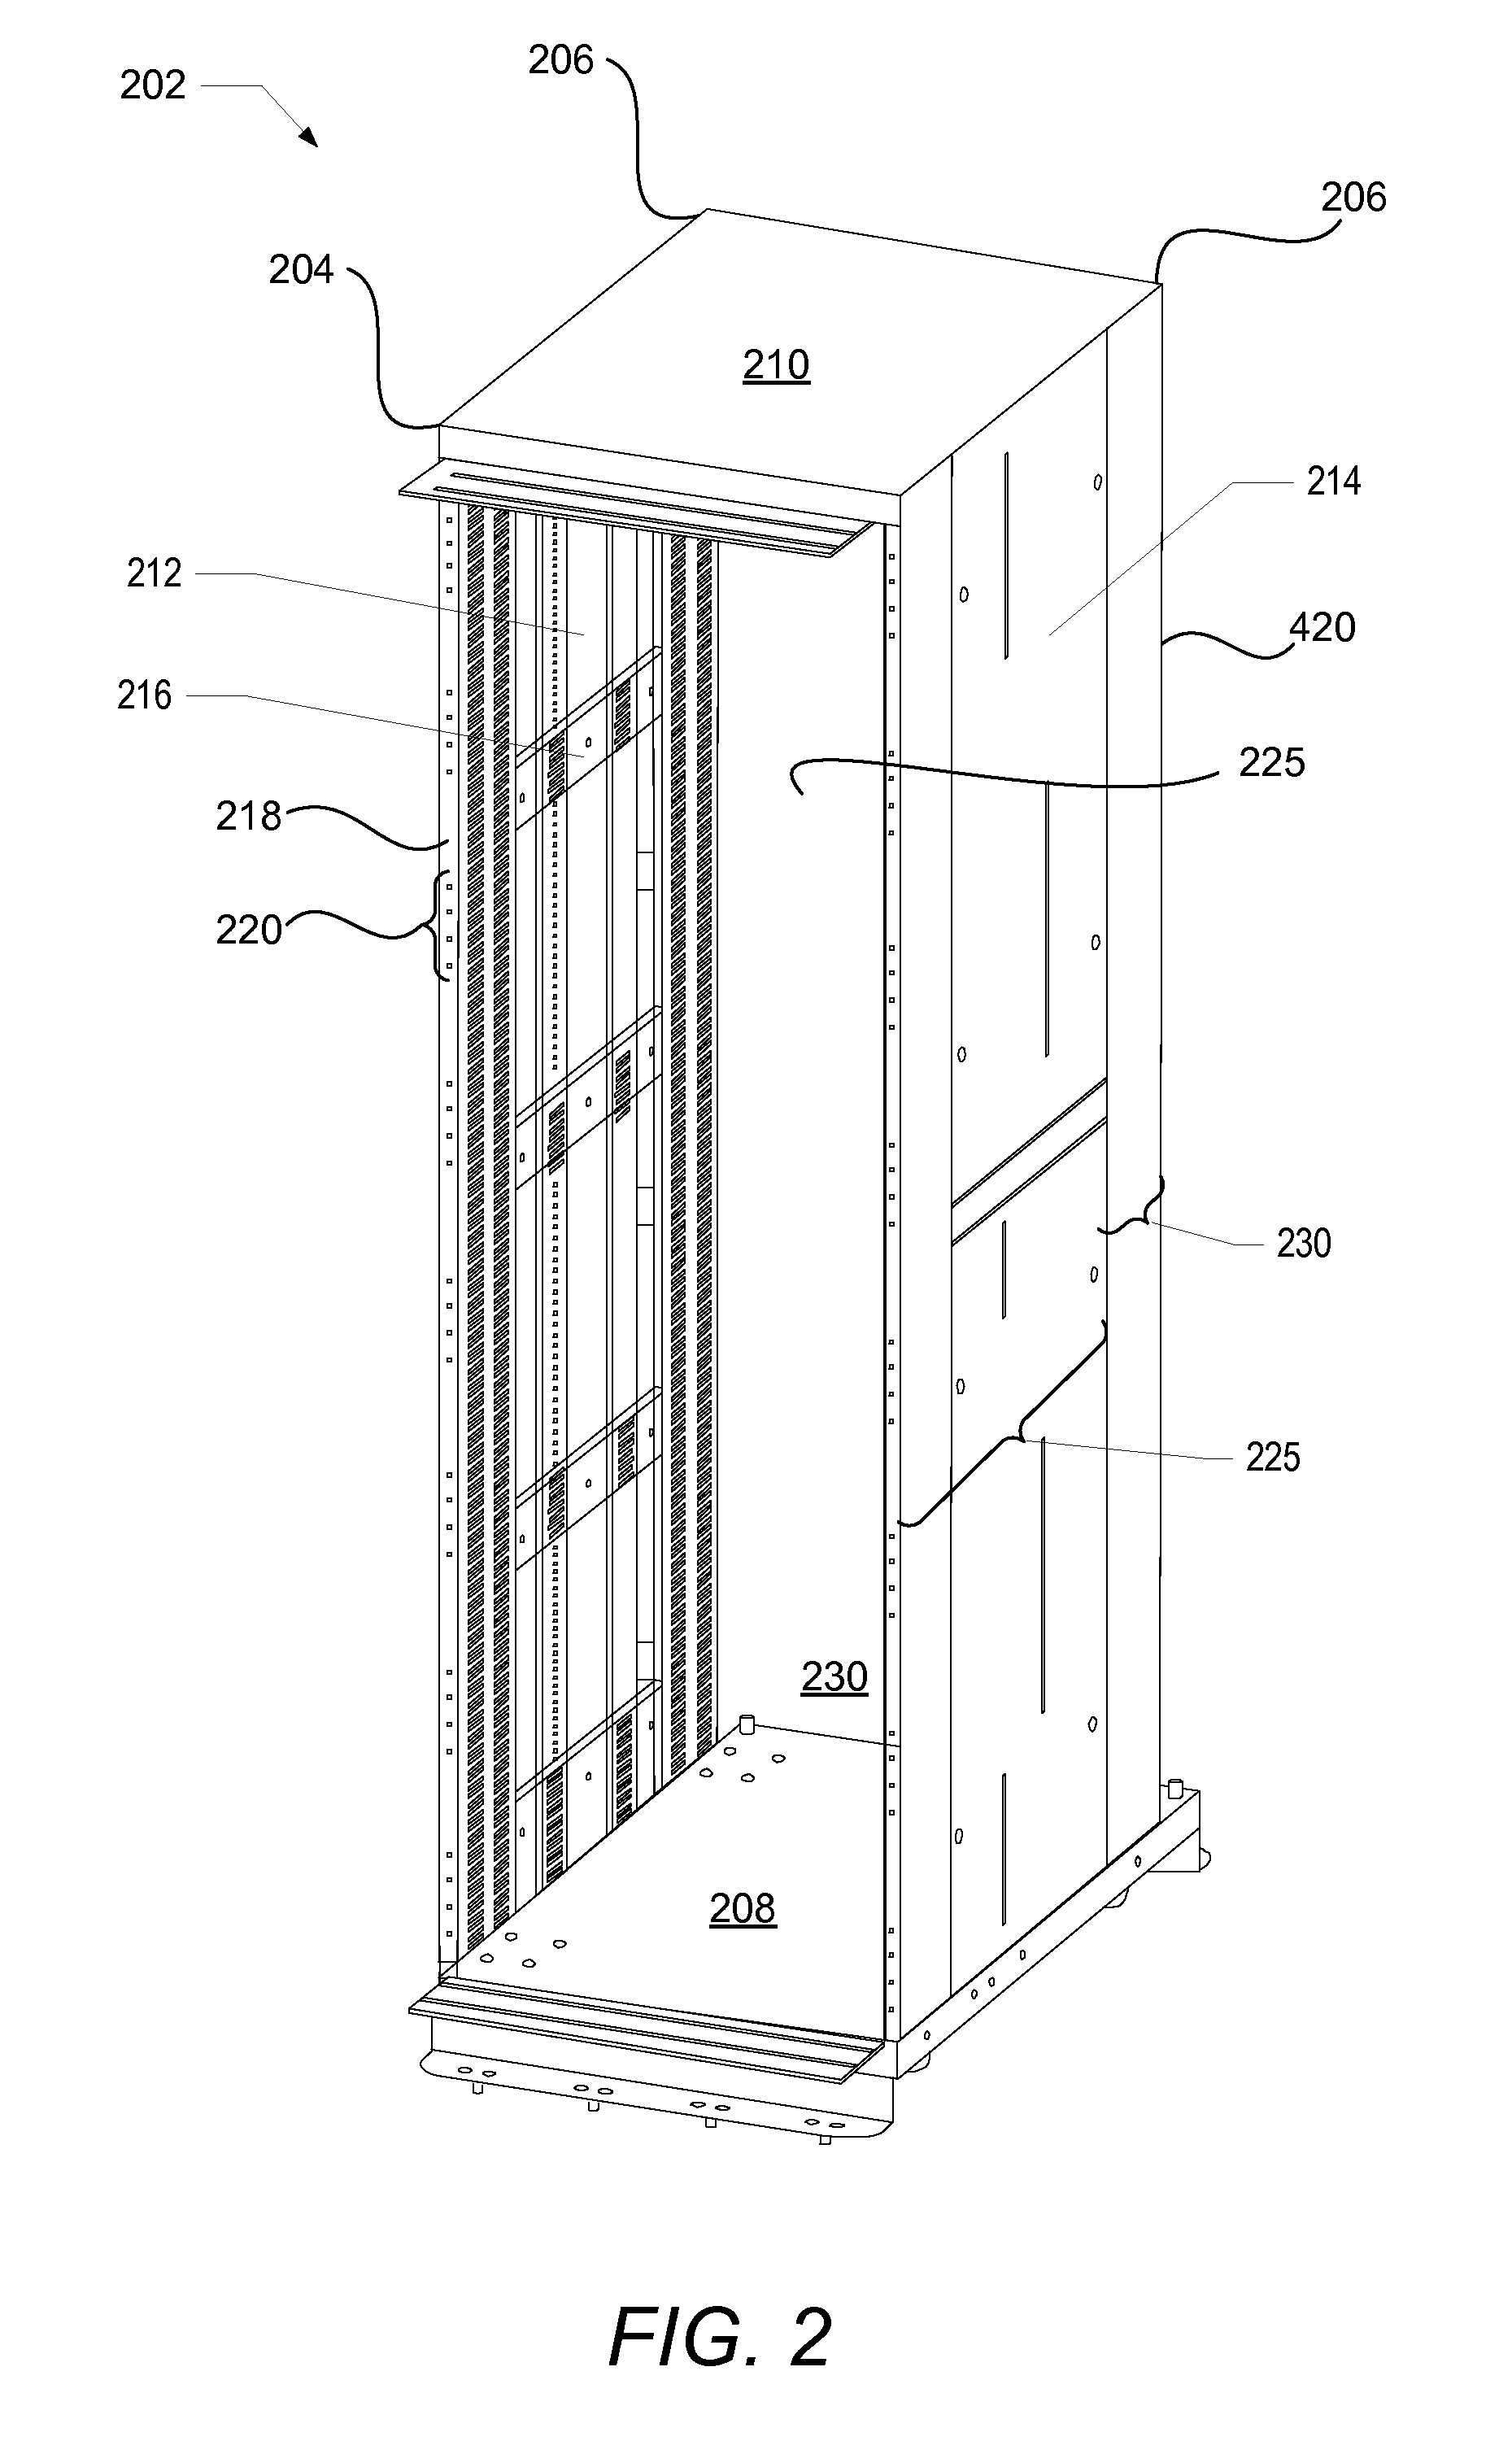 Modular application of peripheral panels as expansion sleeves and cable management components within a rack-based information handling system